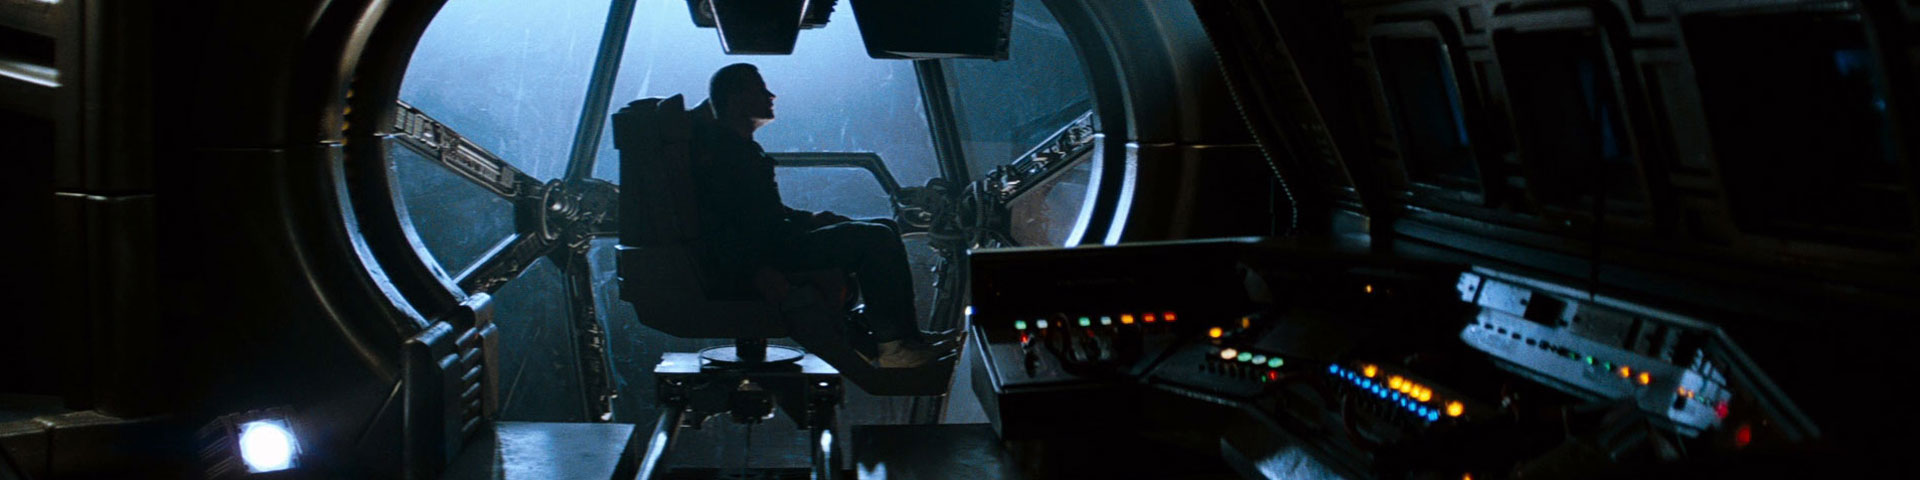 A lone individual sits in an observation bubble on a starship, surrounded by dingy, beat-up computer equipment.